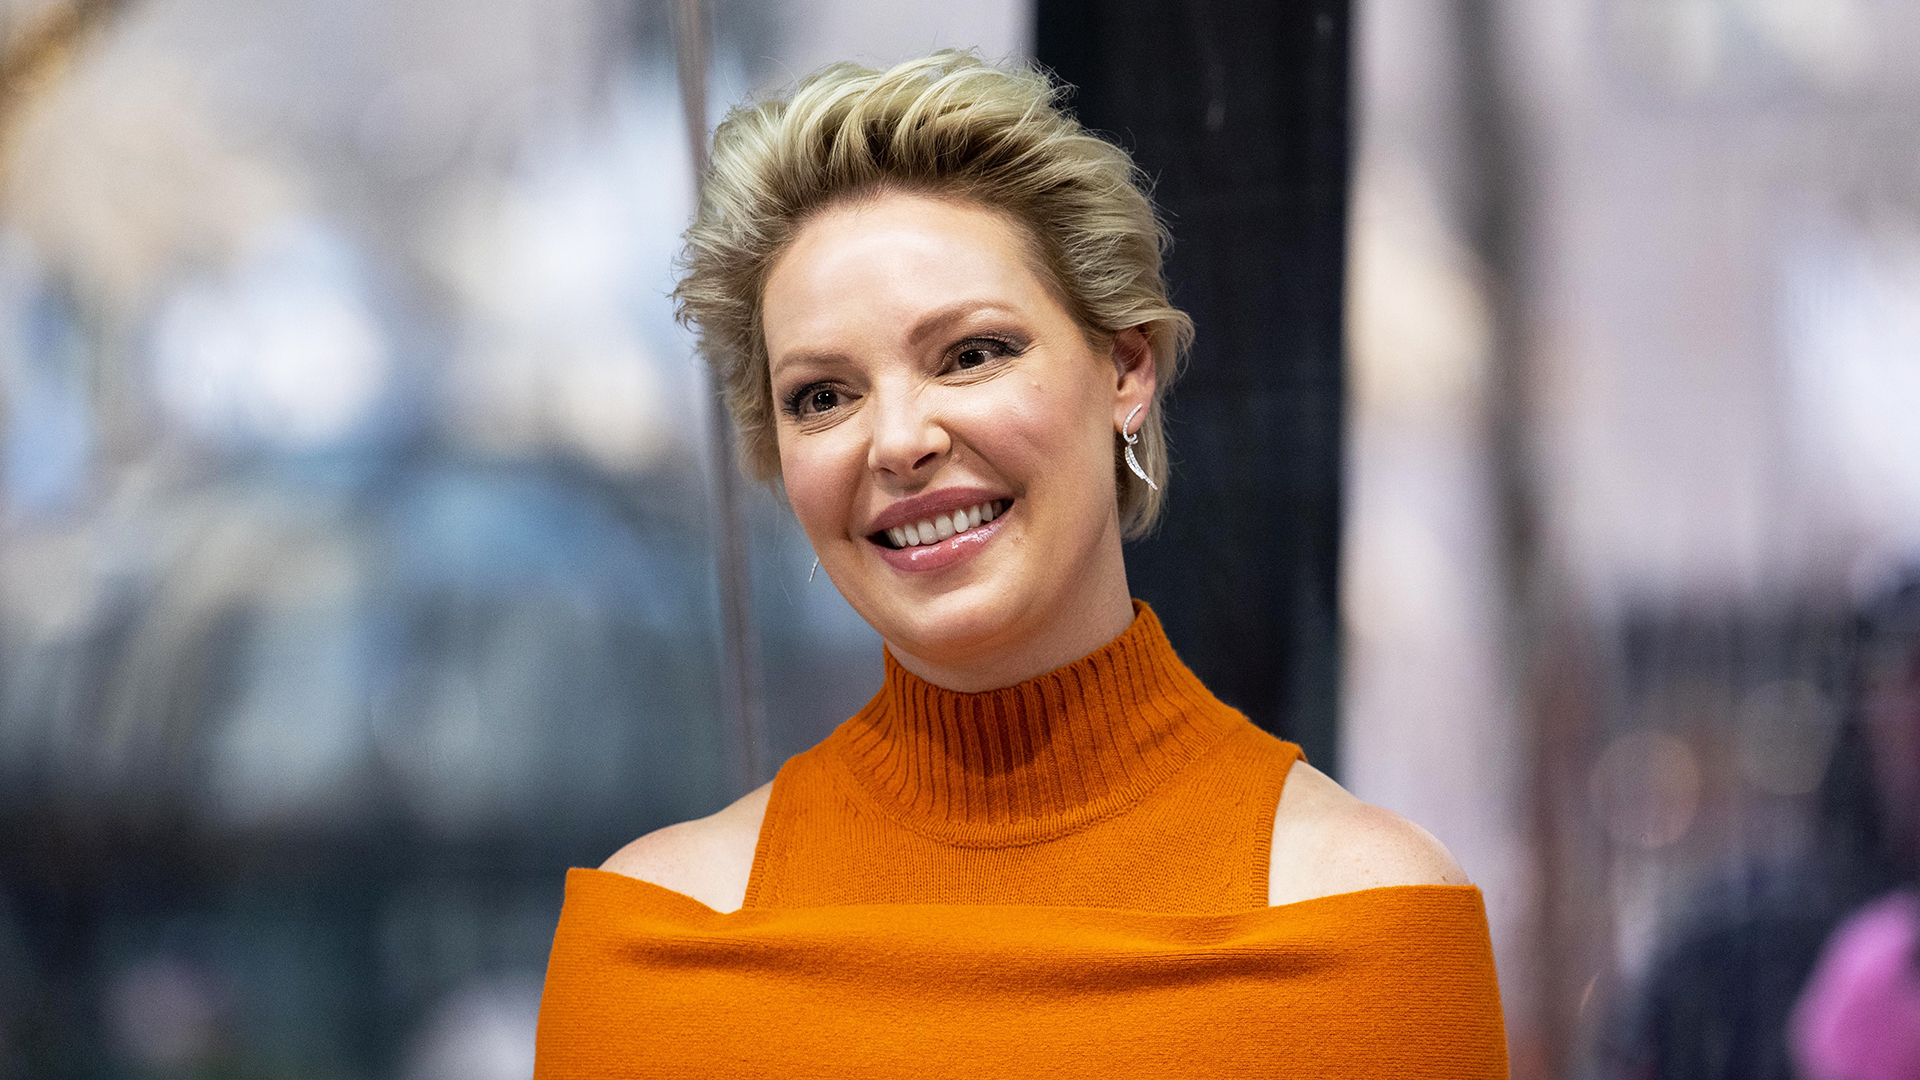 Katherine Heigl Dons 'Firefly Lane' Colors to 'The View' in Red